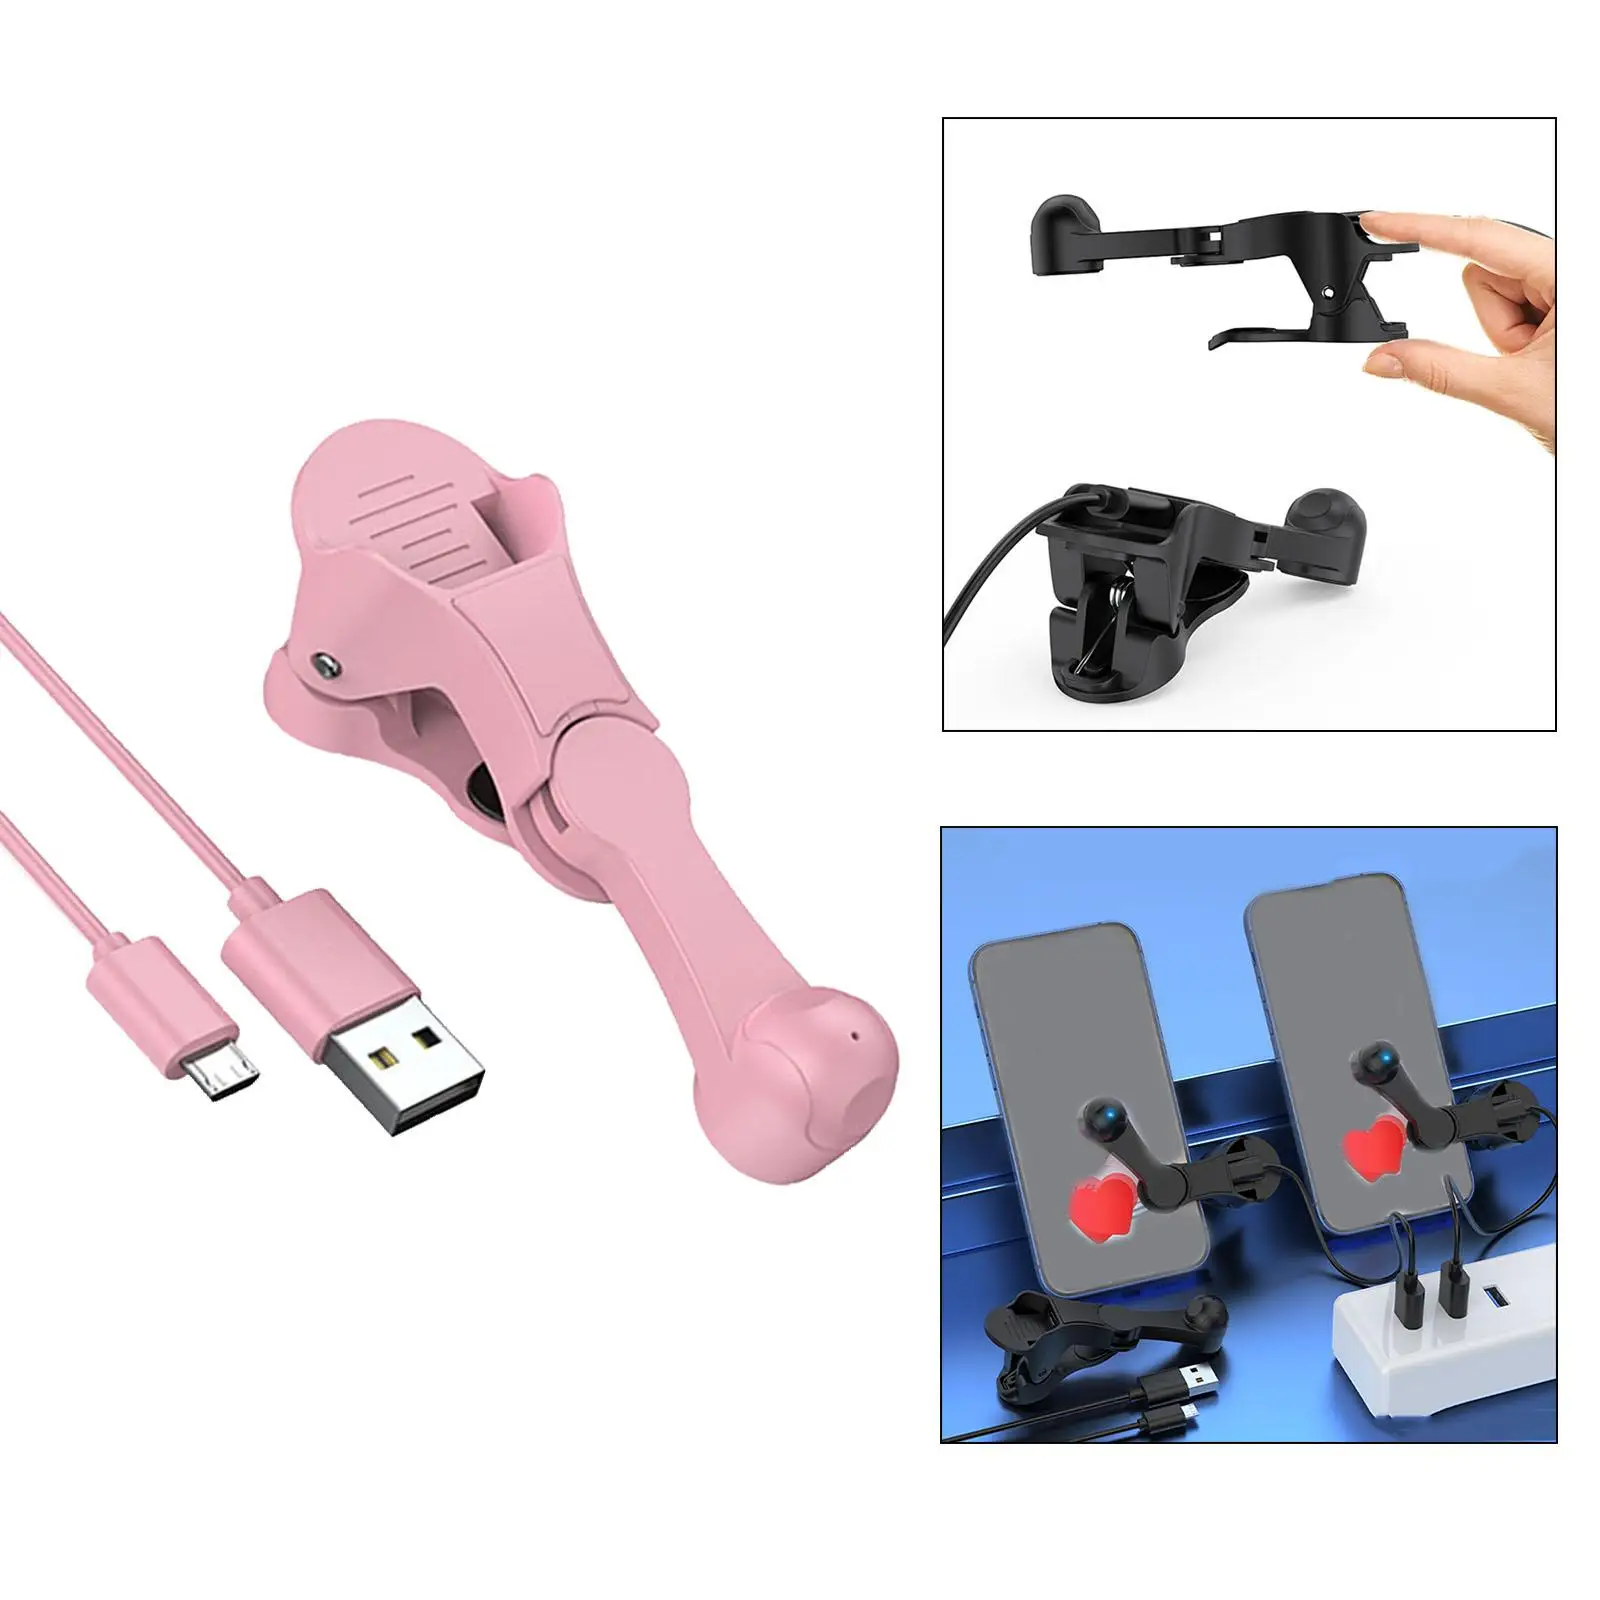 Screen Auto Clicker Connection Point Grabber Simulated Finger Clicking Smart Mute Phone Clicker for Gifts Games Reward Tasks